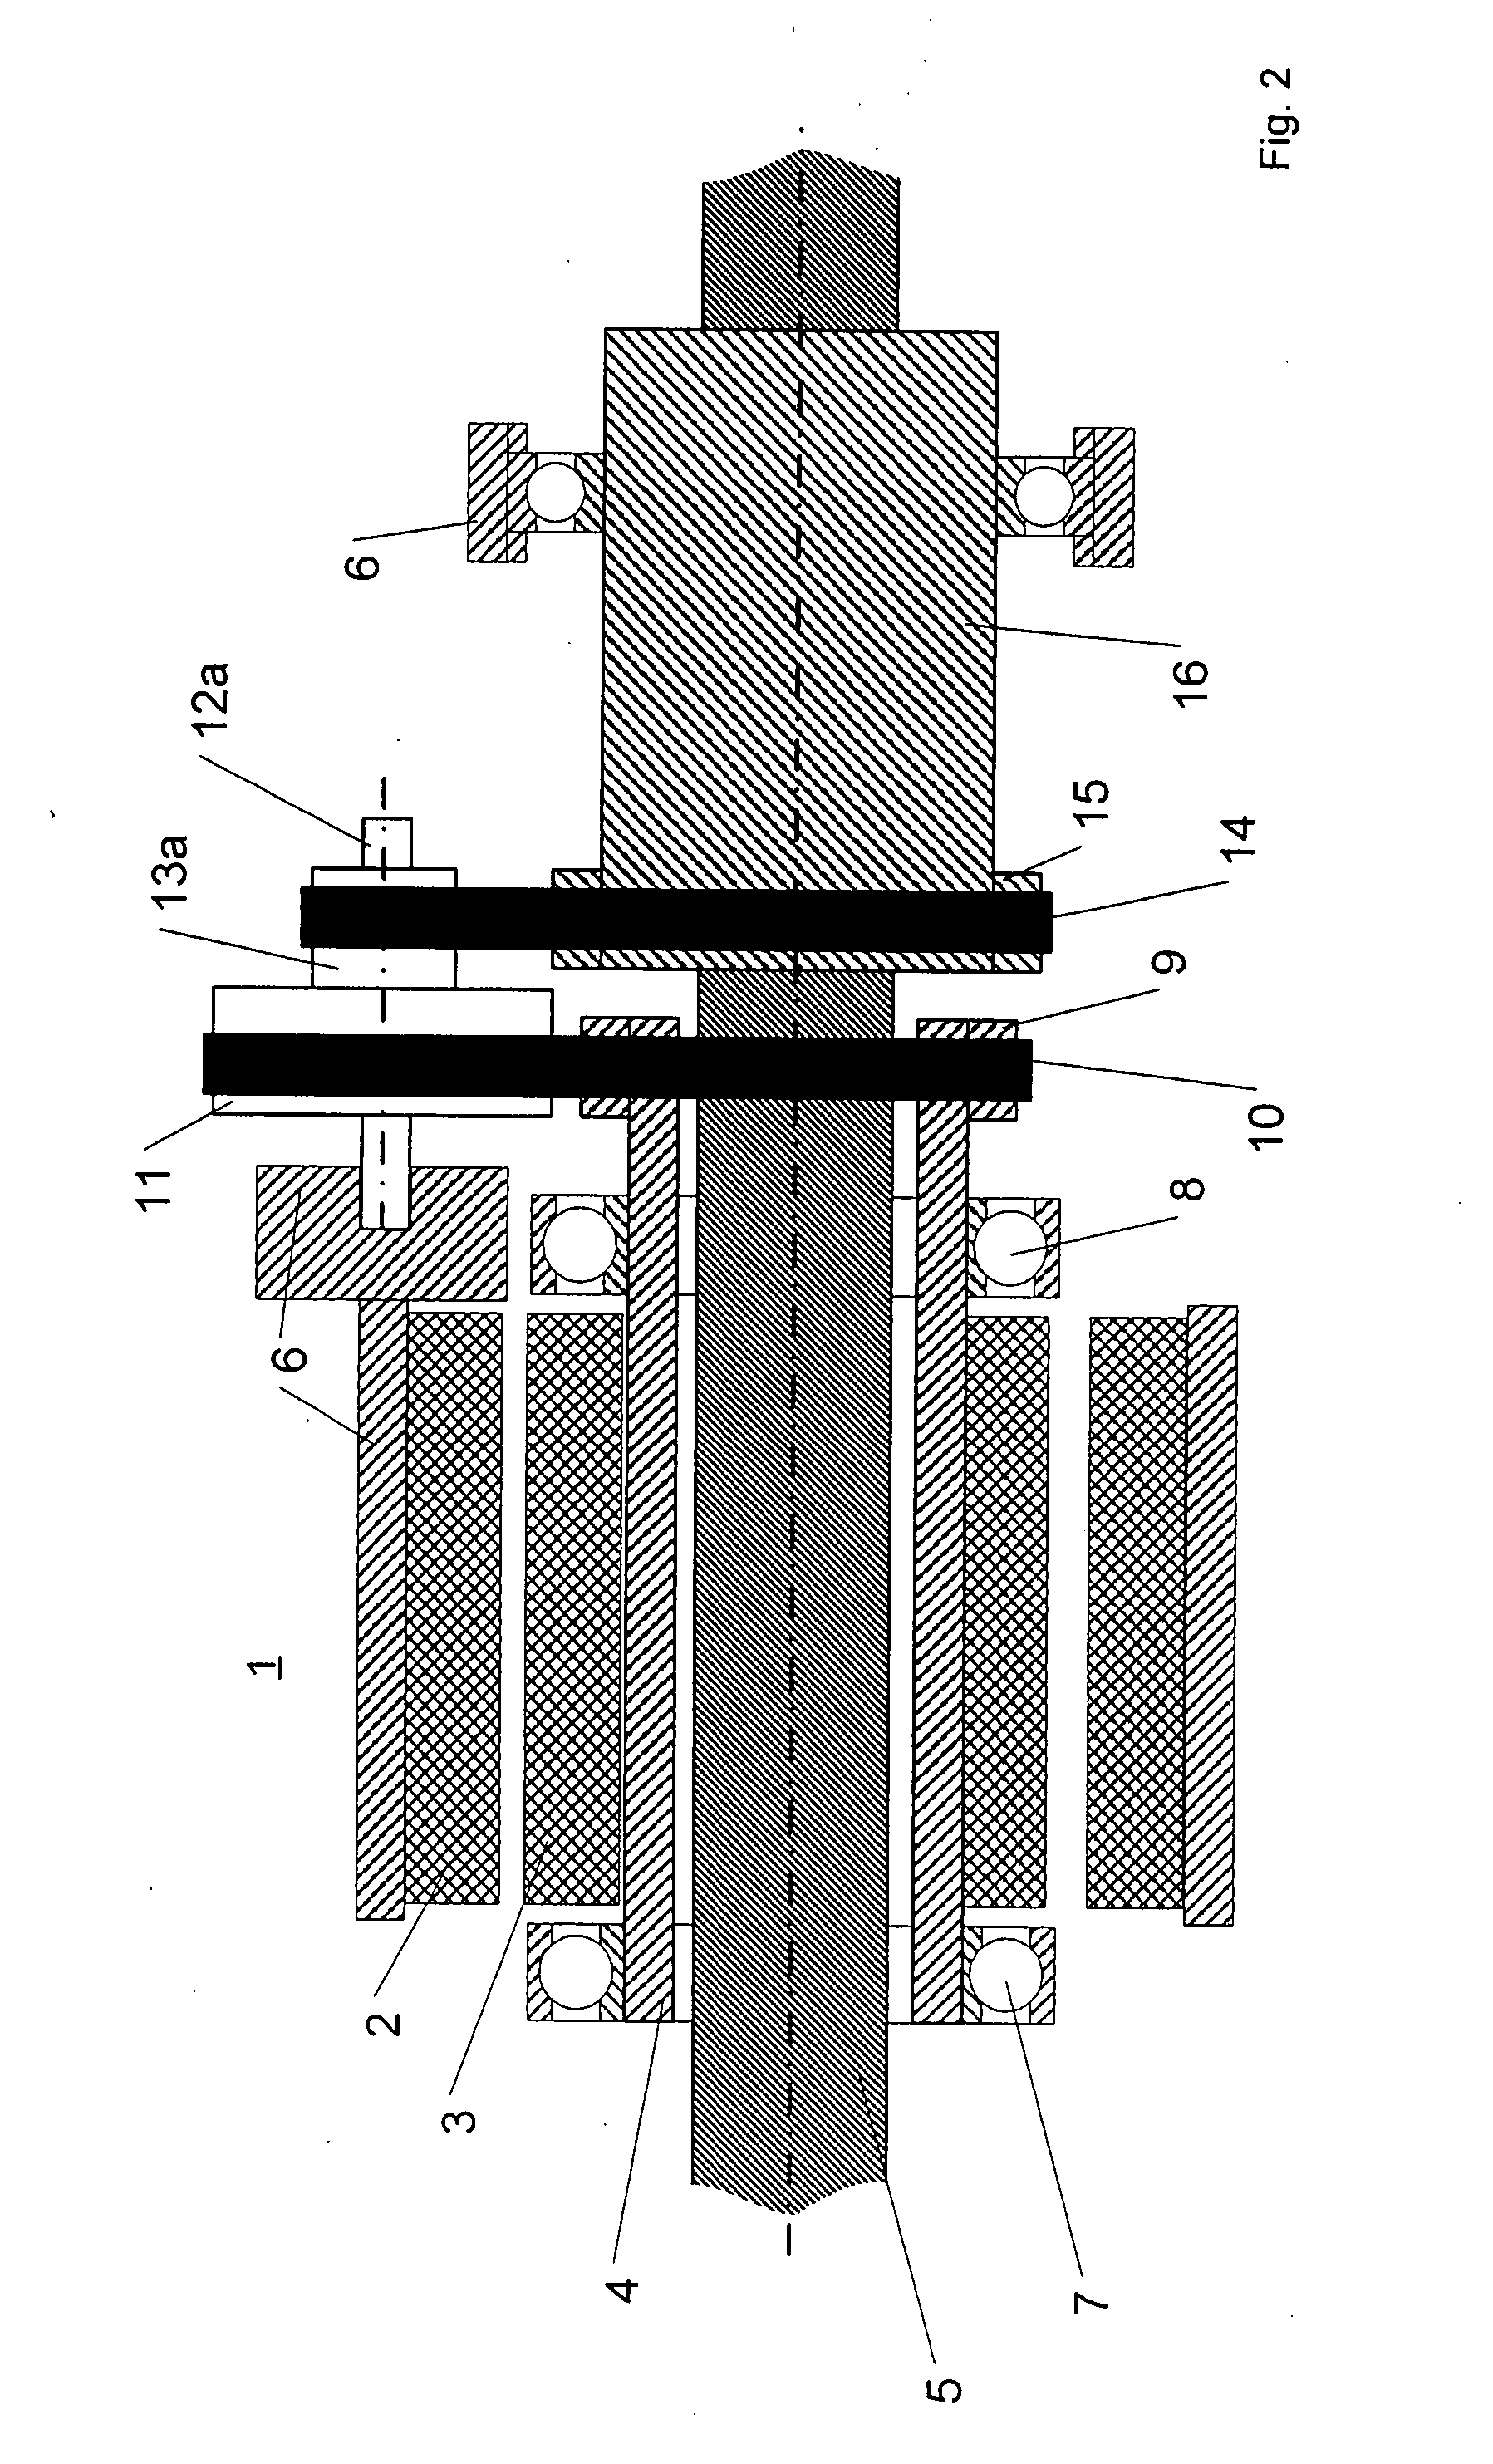 Steering system with hollow shaft electric motor and intermediate transmission